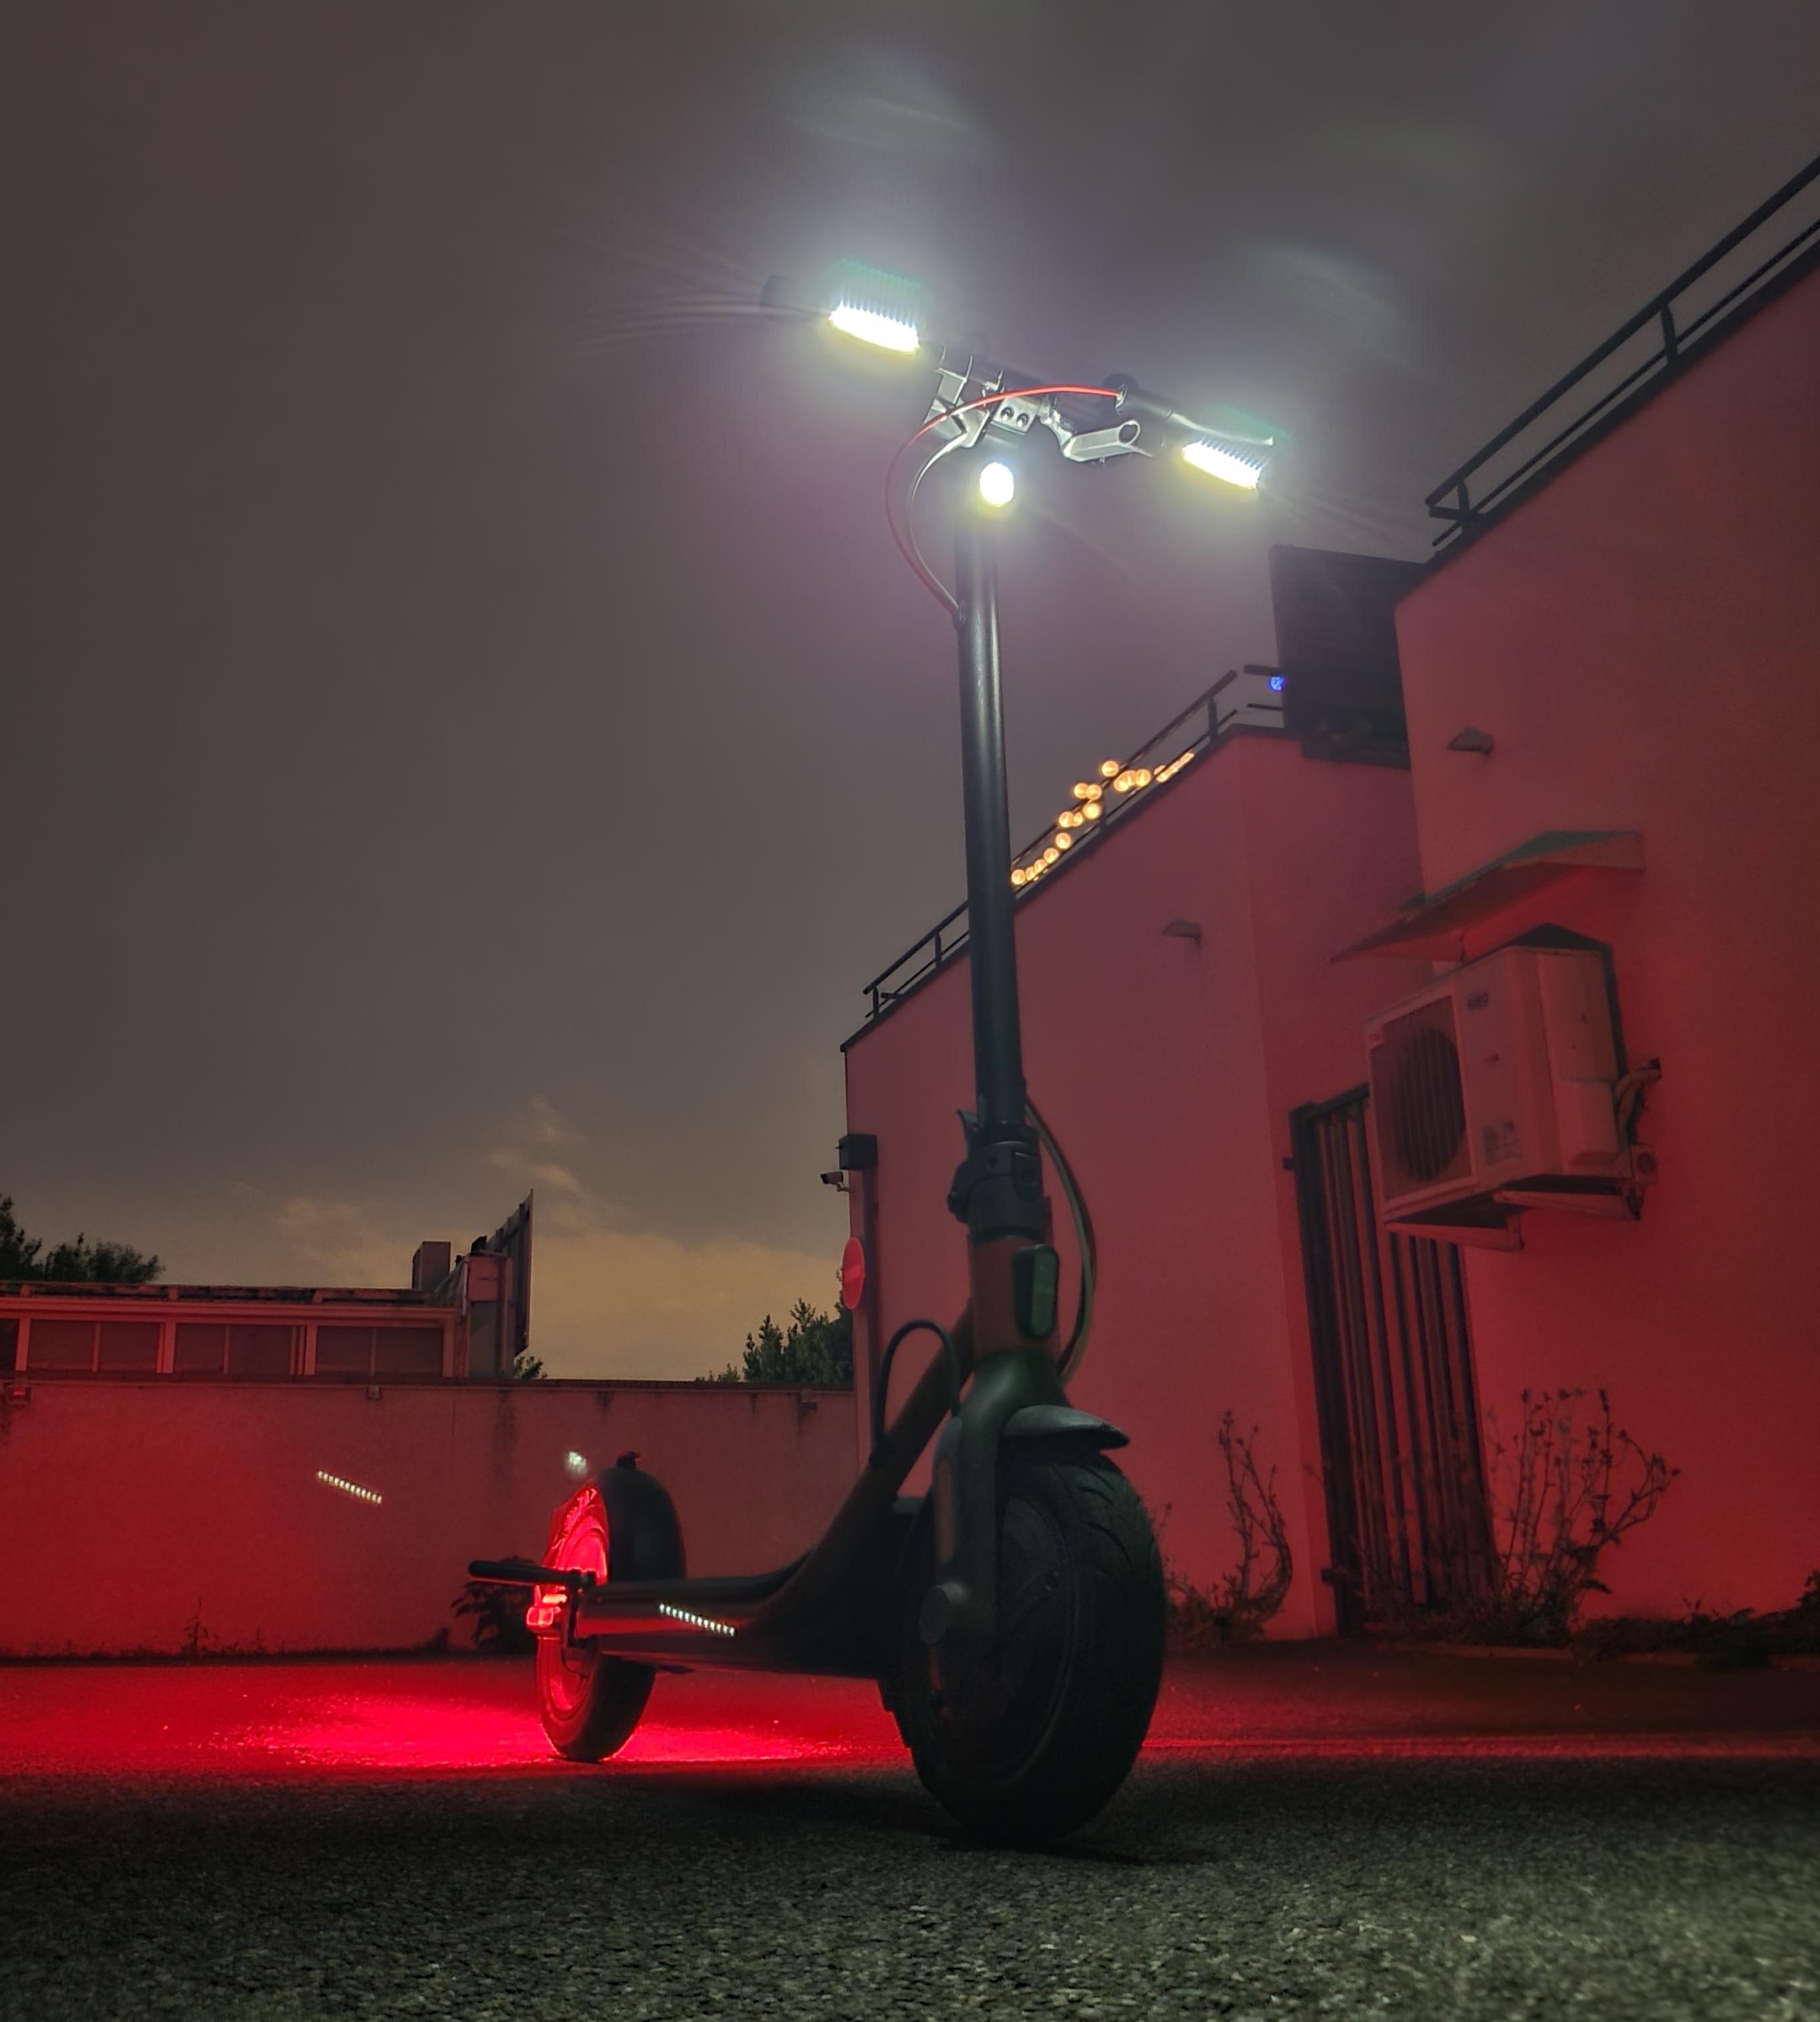 Lights & Turn Signals for Electric Scooter